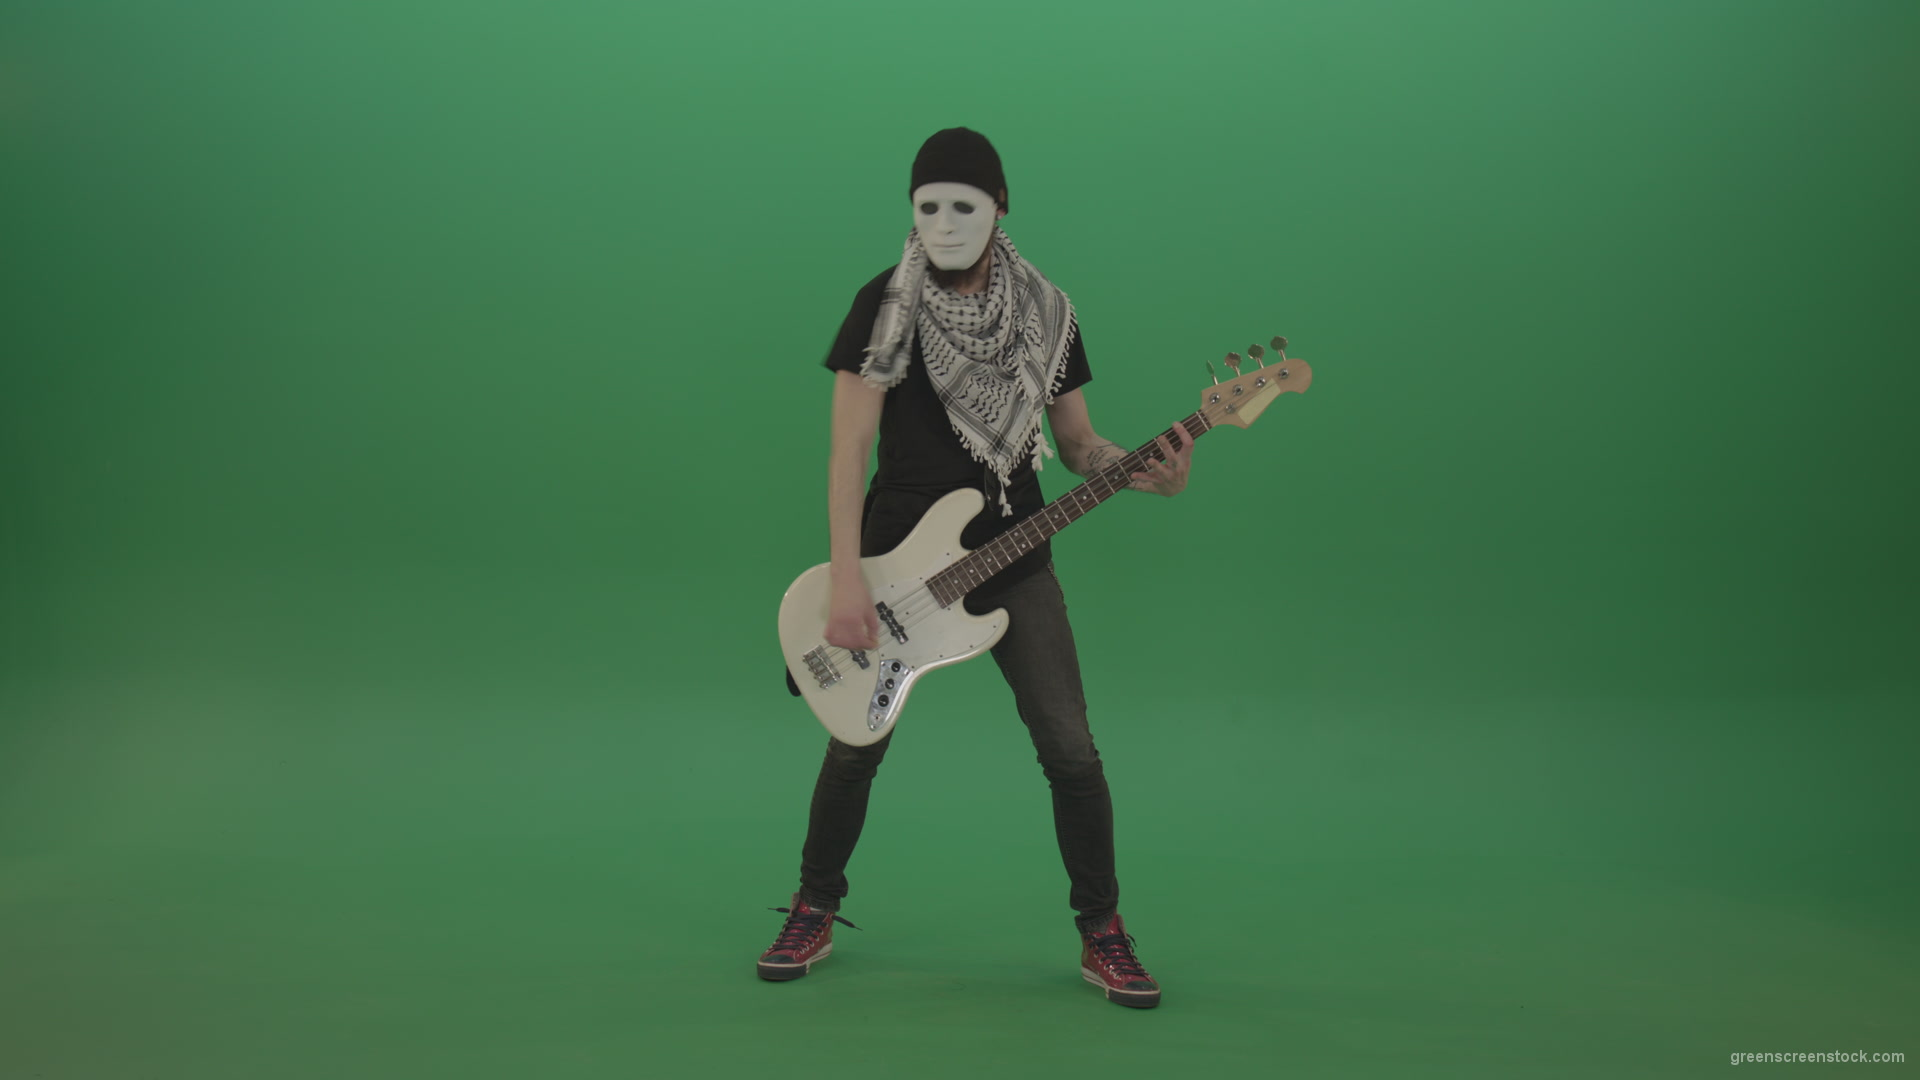 Bass-guitaris-in-full-size-play-white-guitar-in-white-mask-on-chromakey-green-screen_005 Green Screen Stock